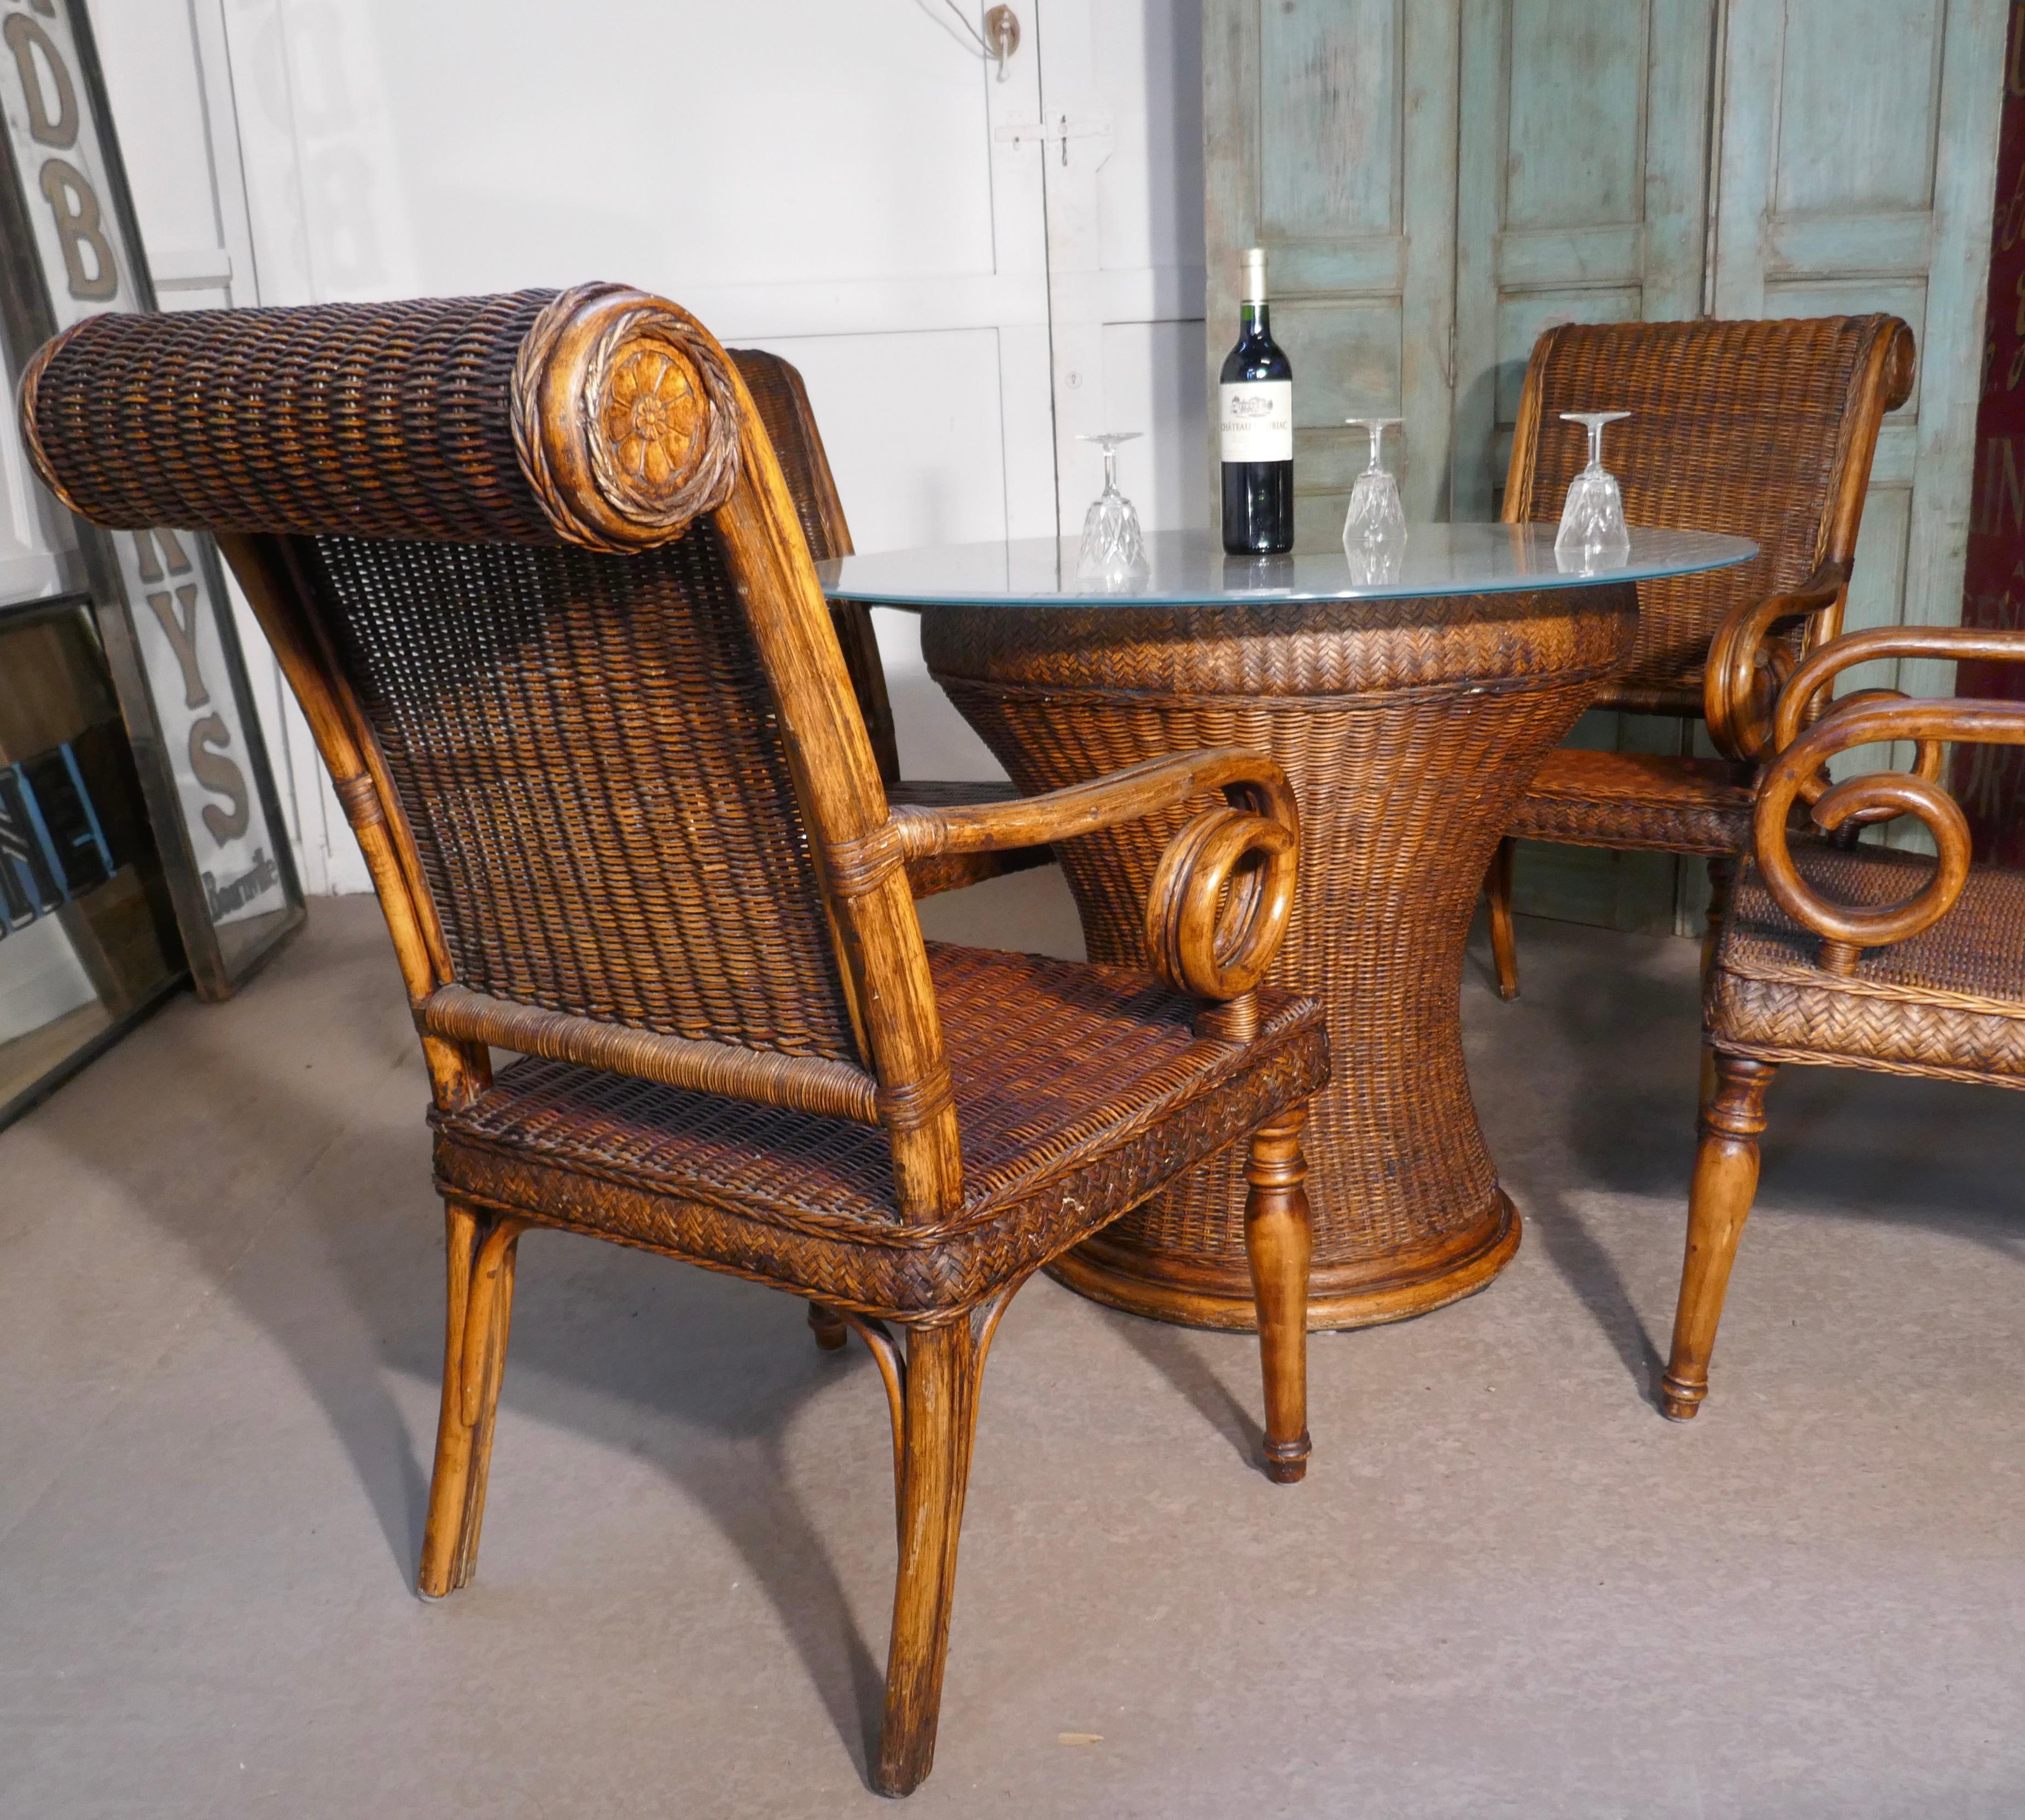 Colonial Revival Superb Plantation or Bistro Set of 4 Cane and Bentwood Armchairs and Table